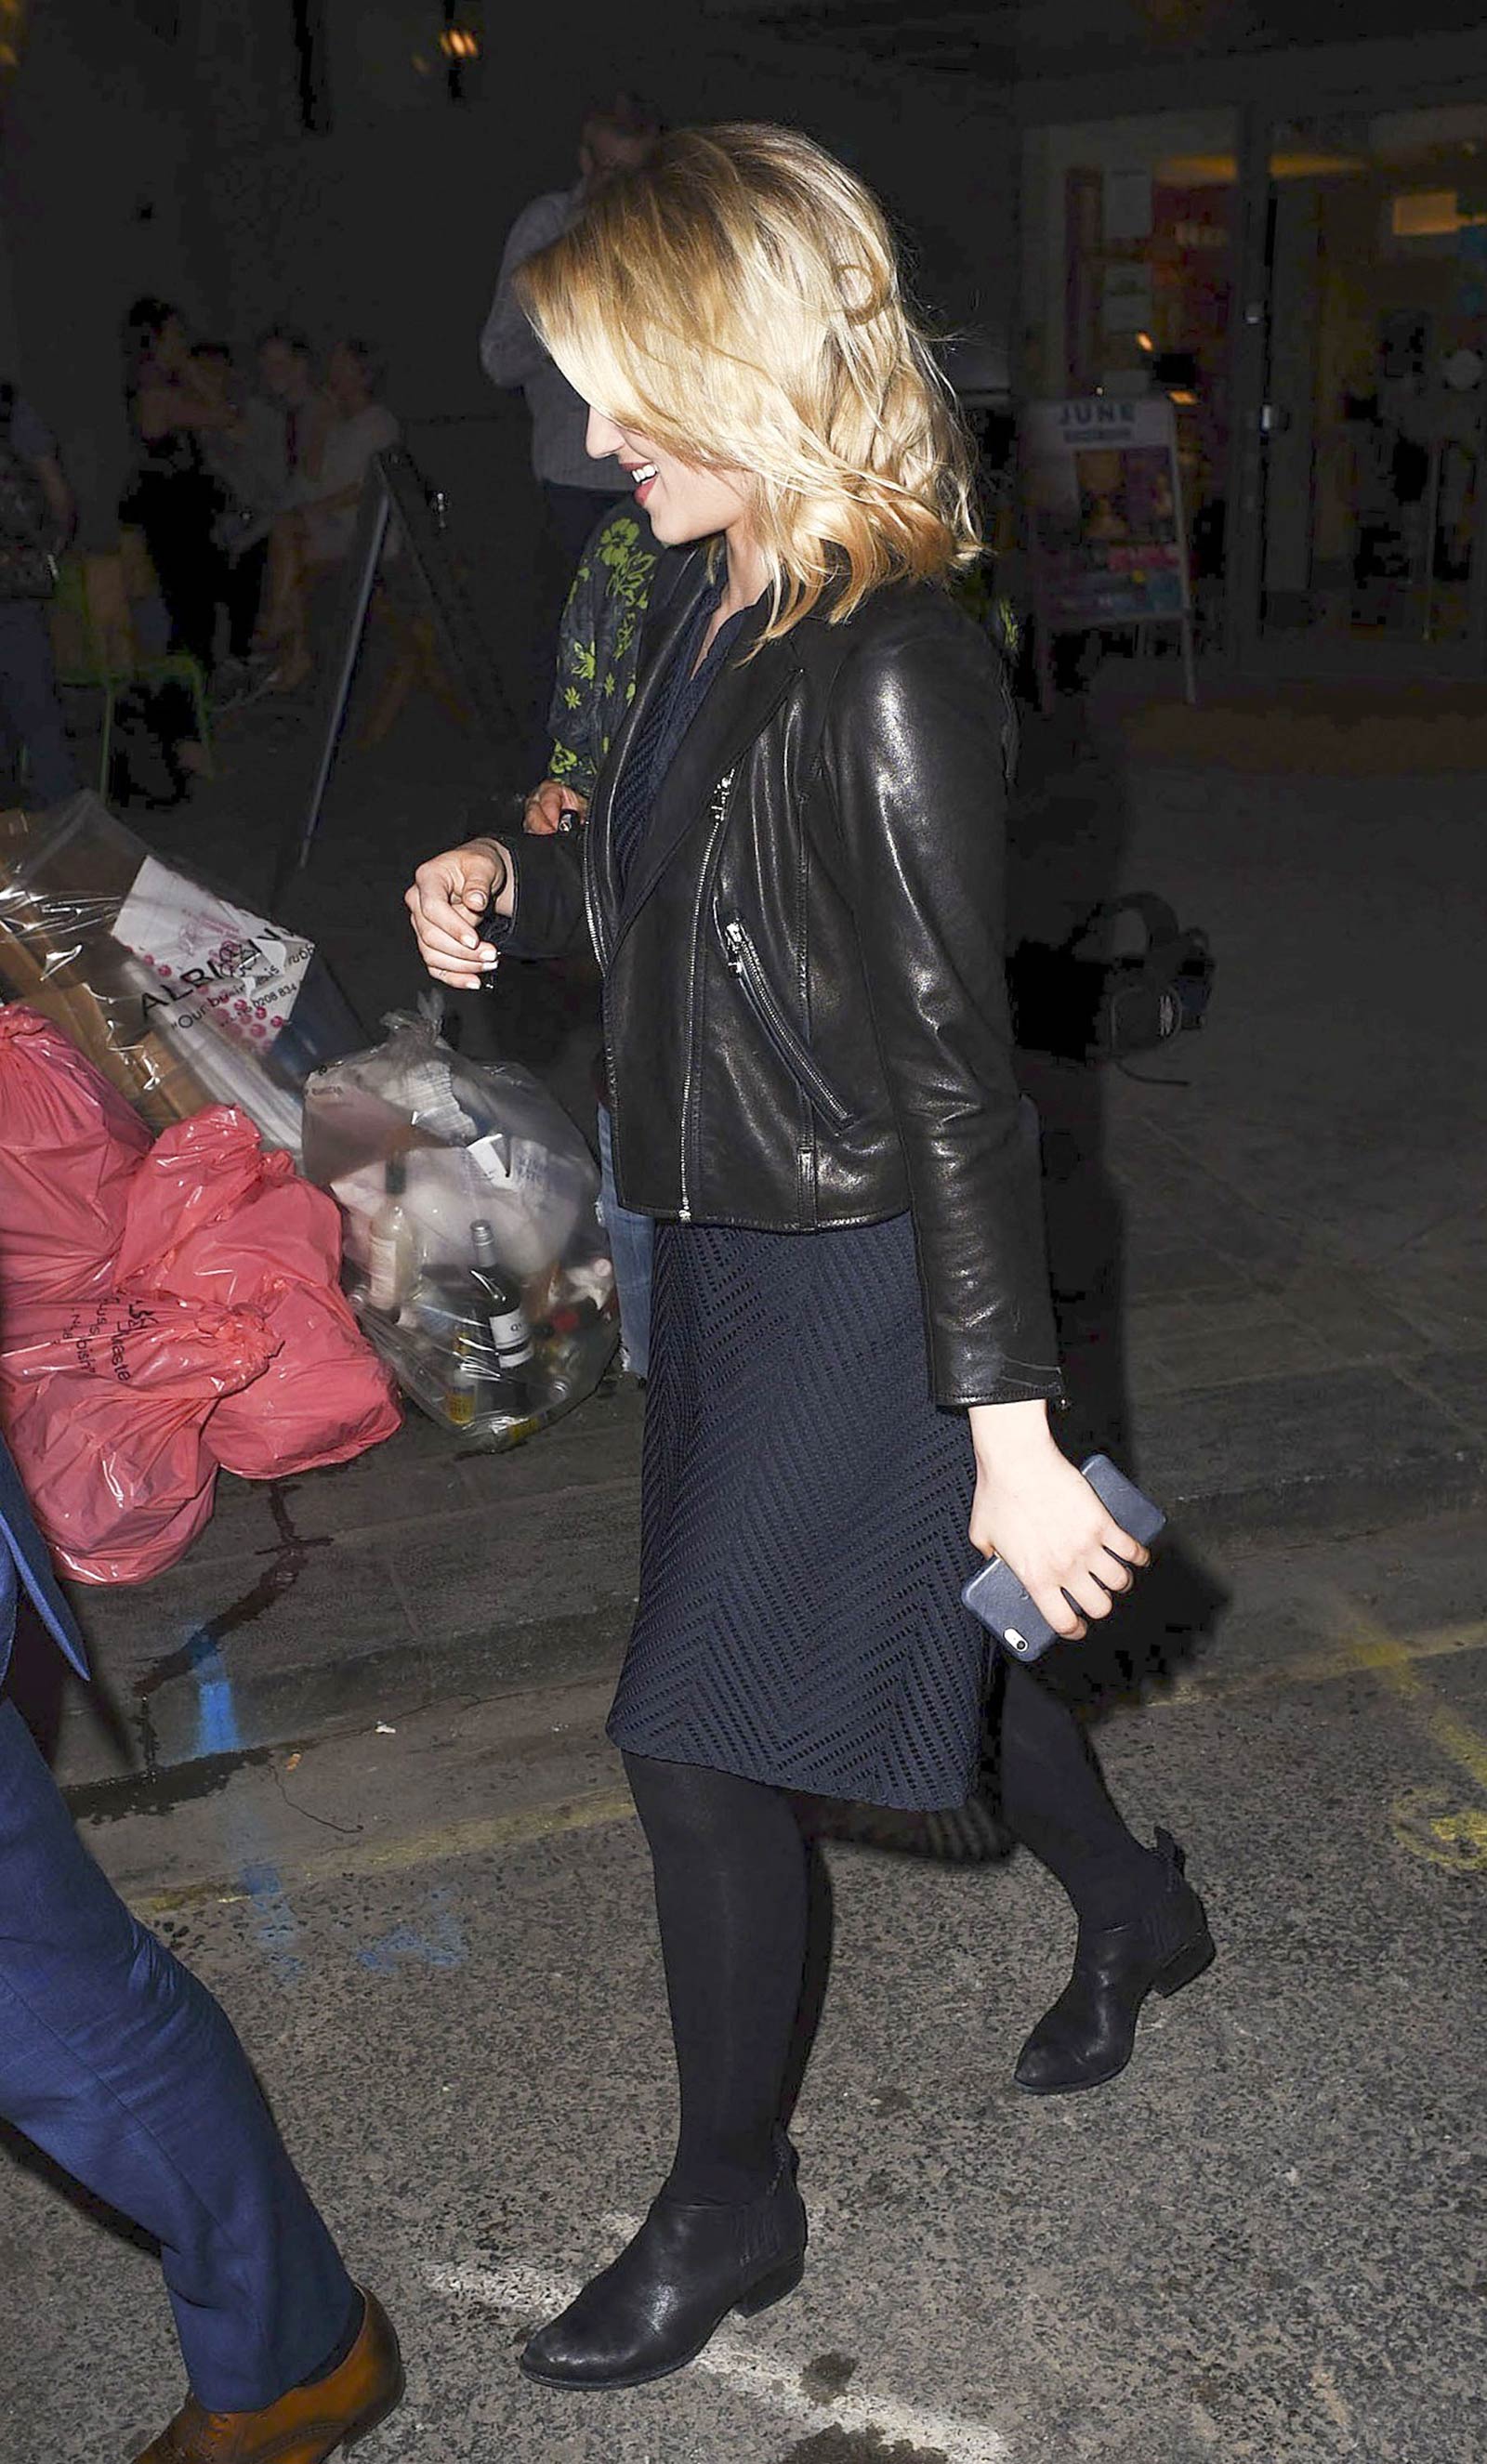 Dianna Agron leaving the St. James Theatre